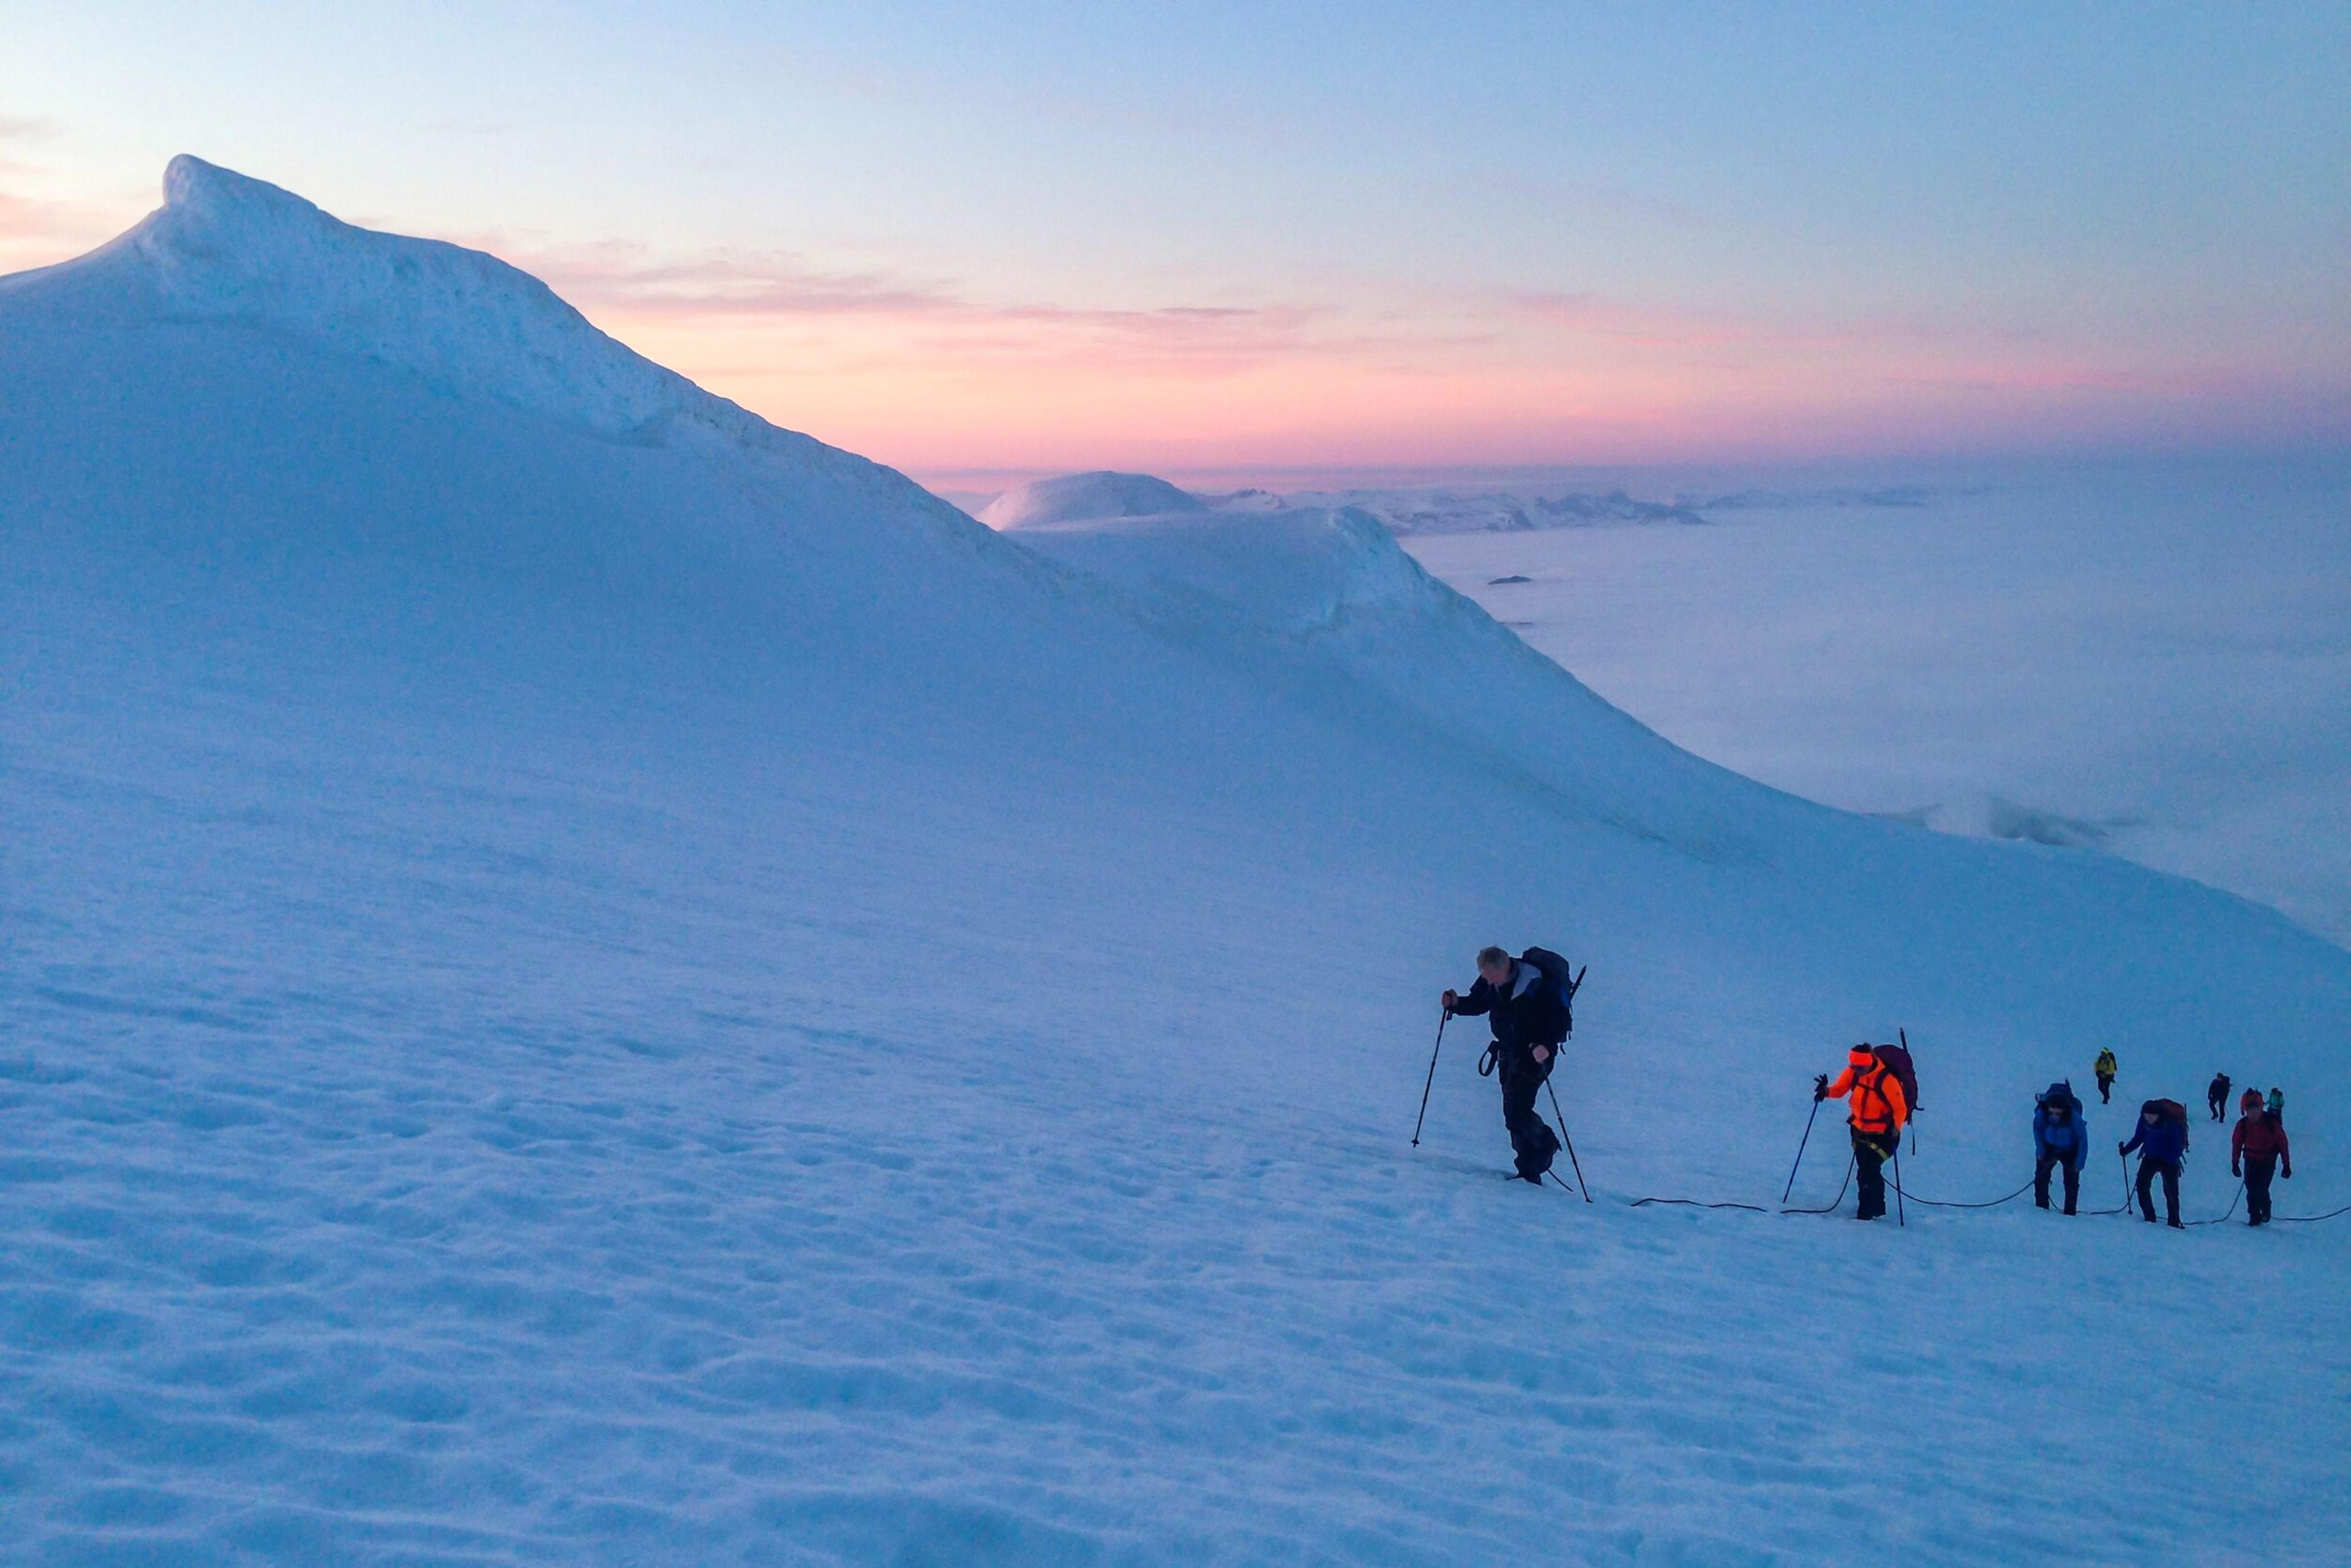 Hikers equipped with poles ascend a snowy slope against a pastel sunset sky, with the silhouette of a mountain ridge extending into the distance.